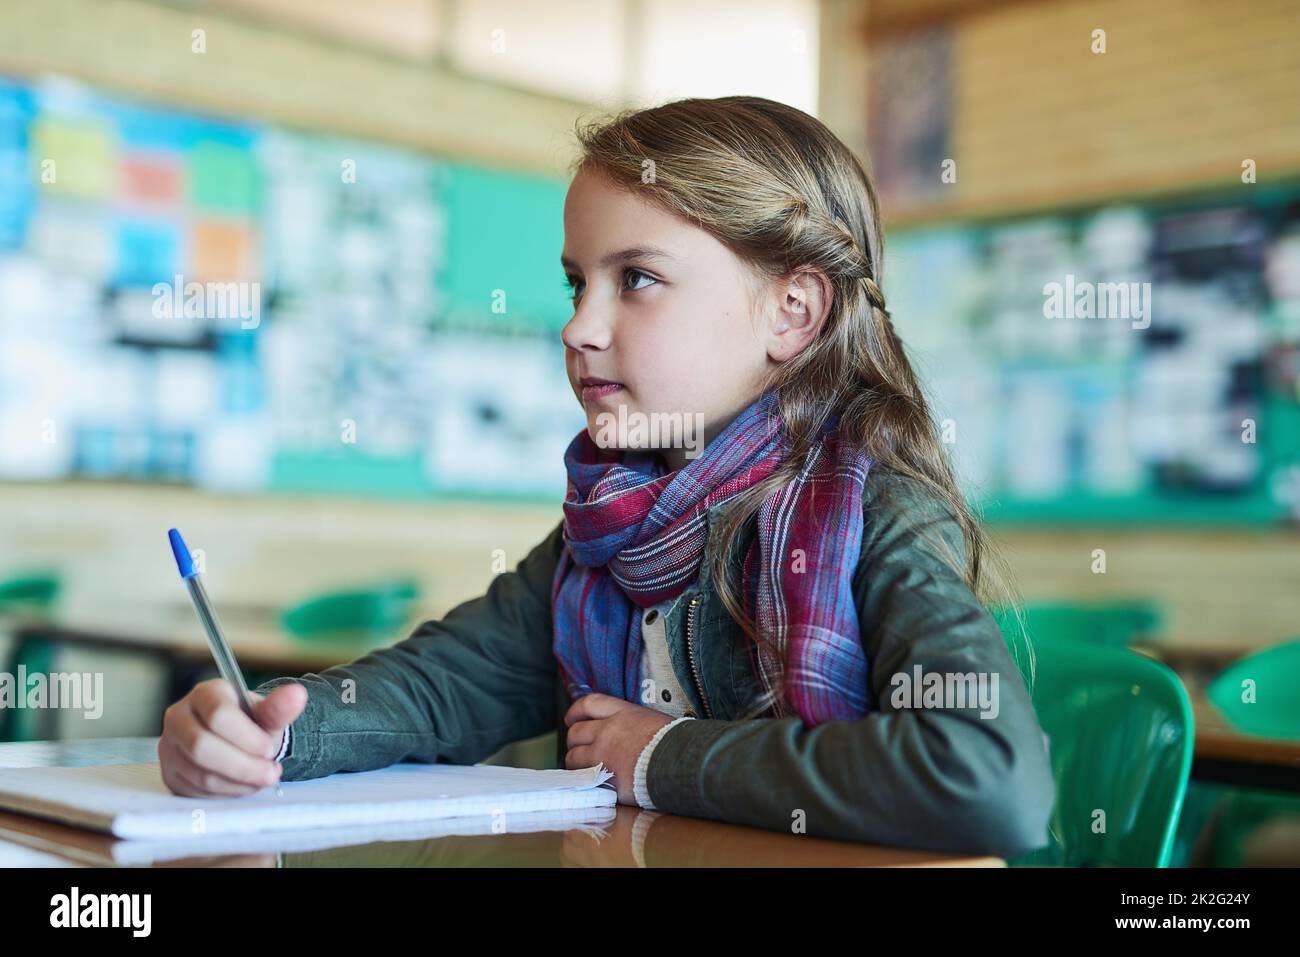 Listening carefully in class. Shot of an elementary school girl working in class. Stock Photo